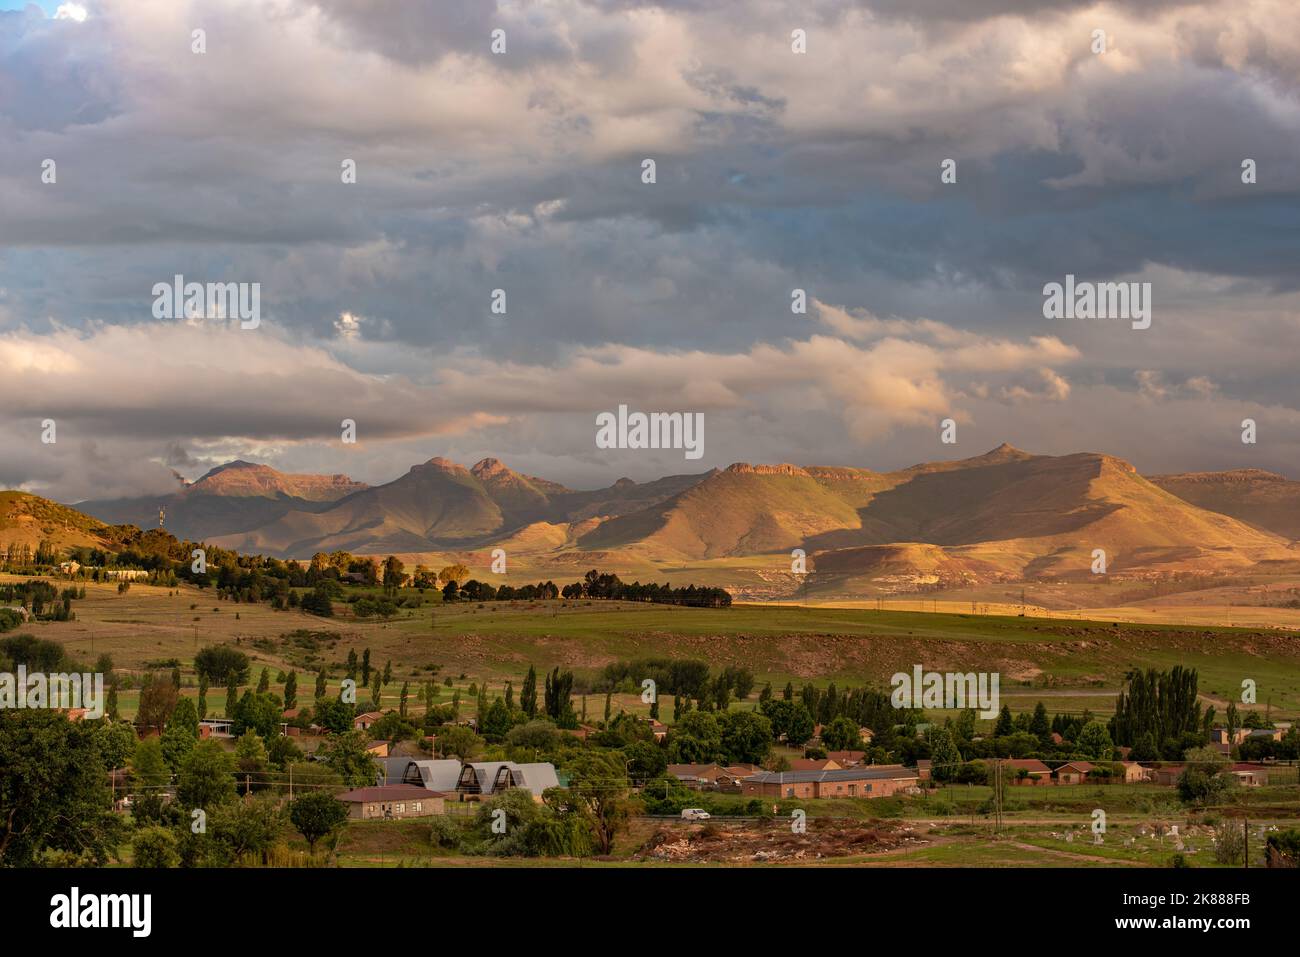 A view of the mountains lit up in gold under a stormy sky at sunset in Clarens, South Africa. This popular tourist destination is near the Golden Gate Stock Photo